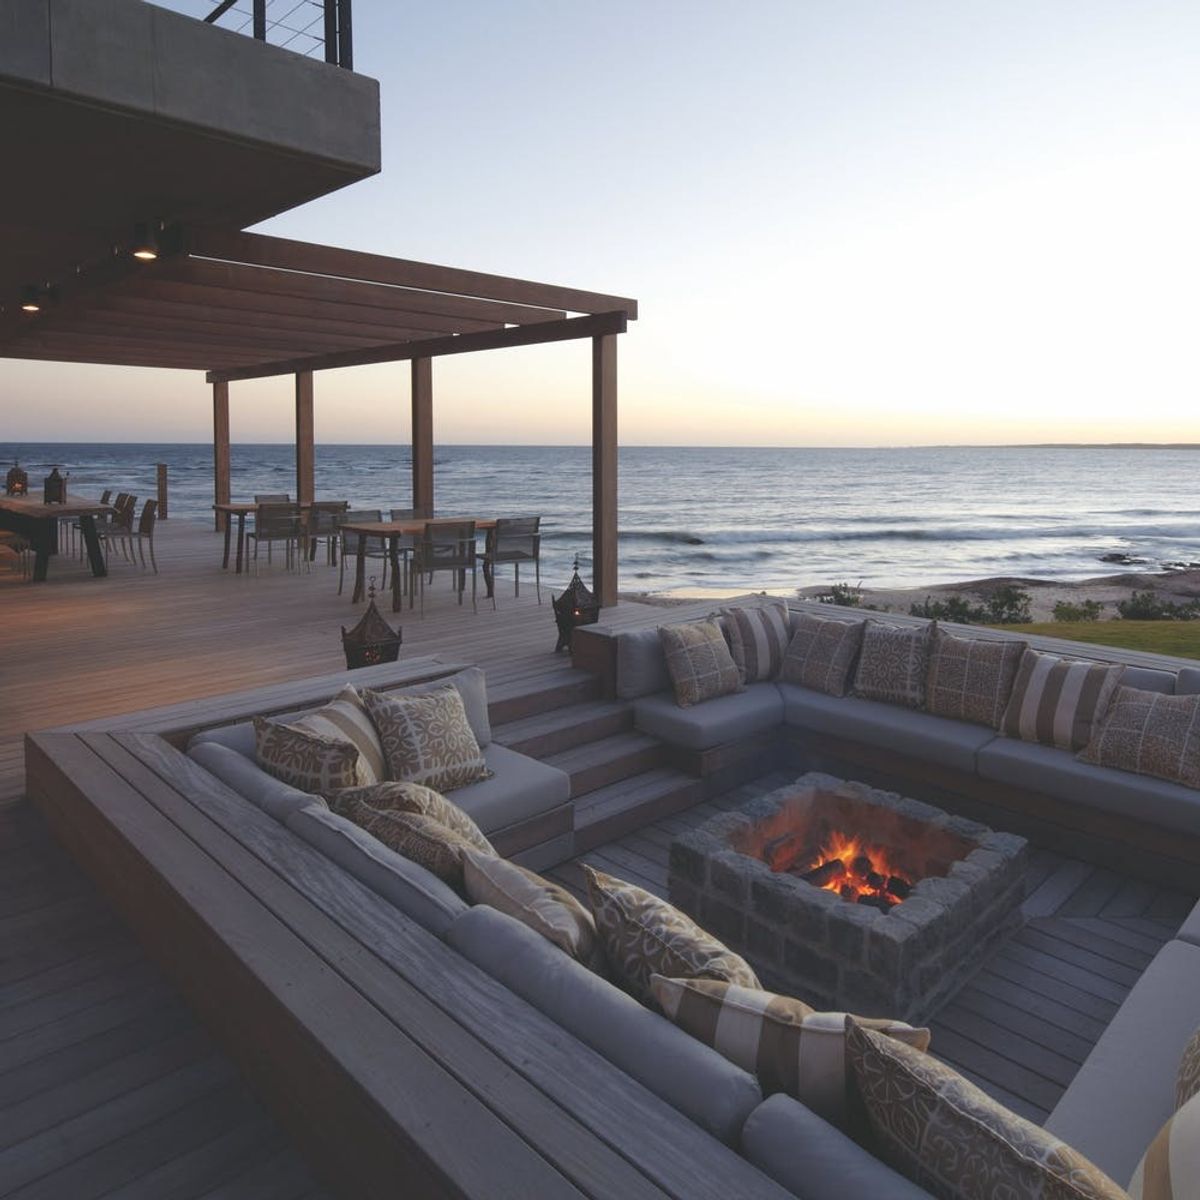 16 Romantic Outdoor Fireplaces and Fire Pits Perfect for Cuffing Season